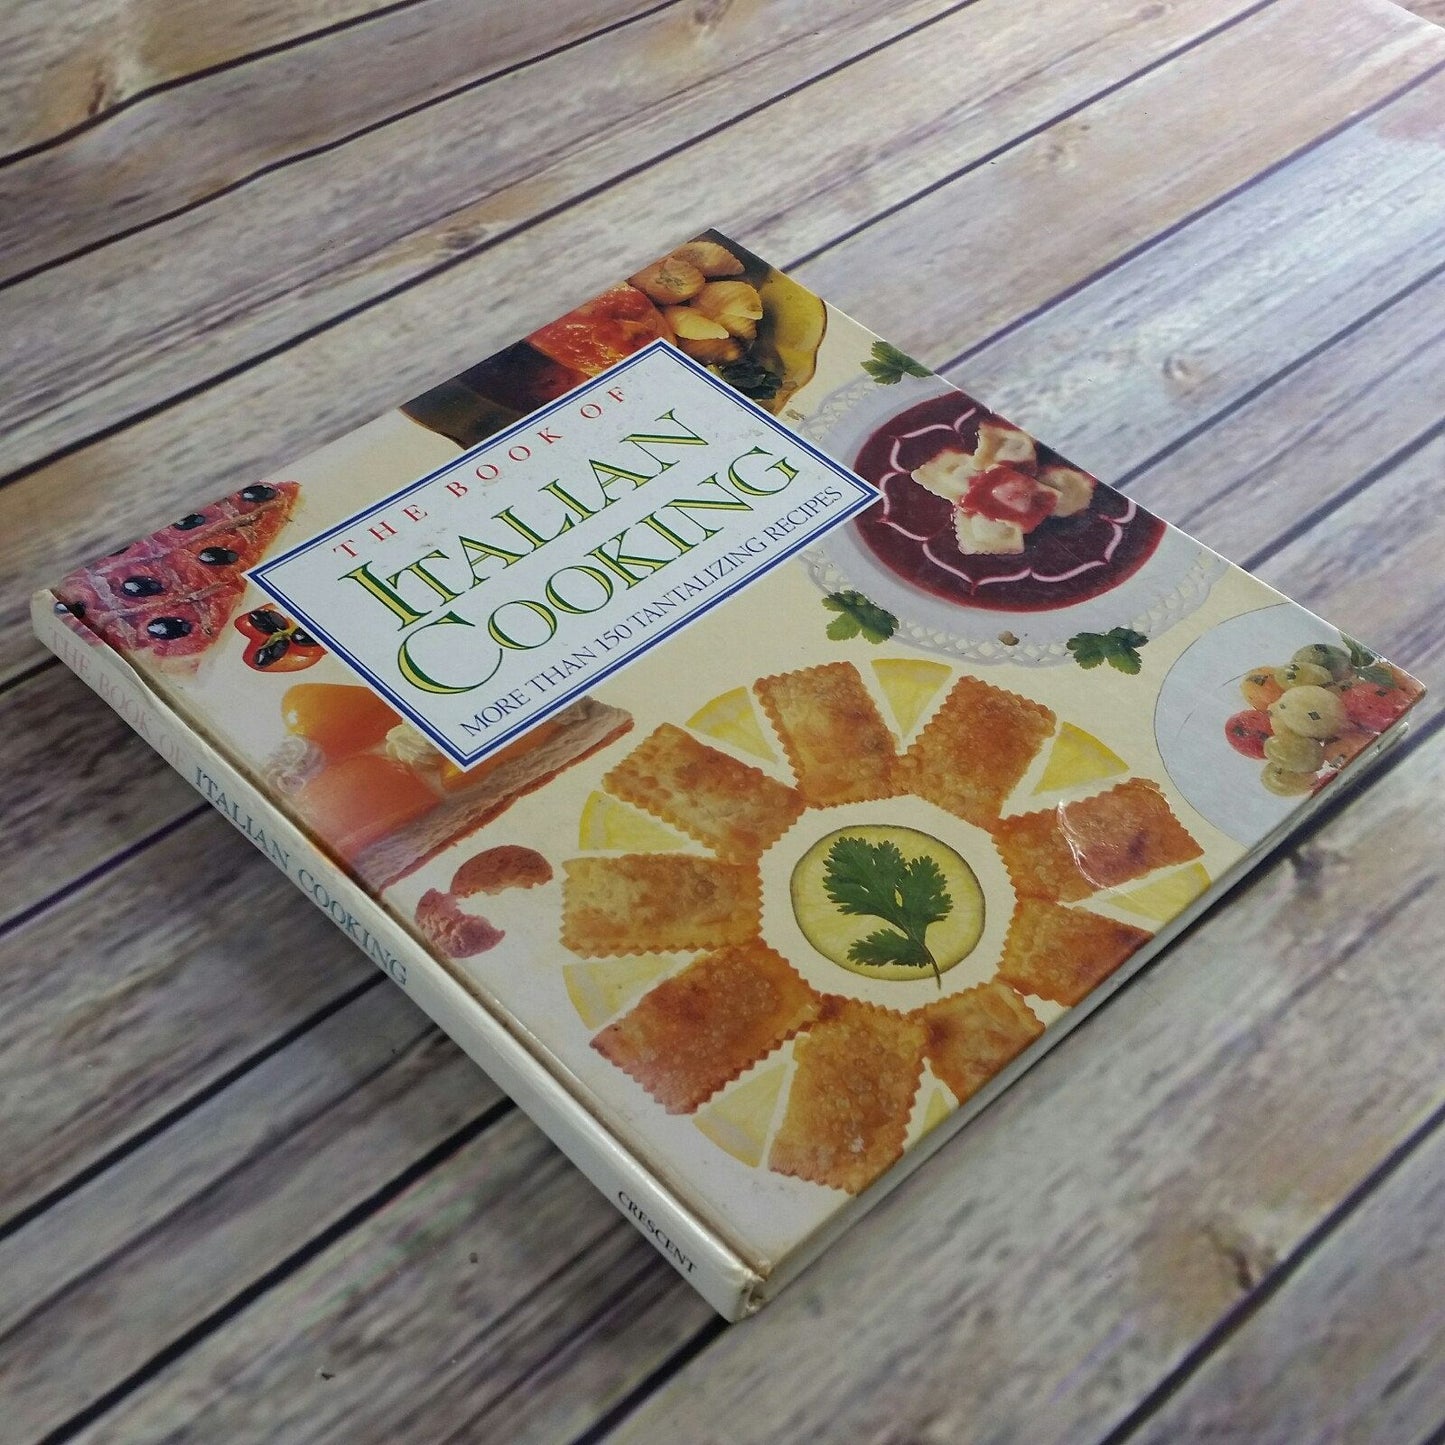 Vintage Italian Cookbook 1991 Hardcover Recipes Crescent Books Printed in Italy 150 Italian Food Recipes The Book of Italian Cooking